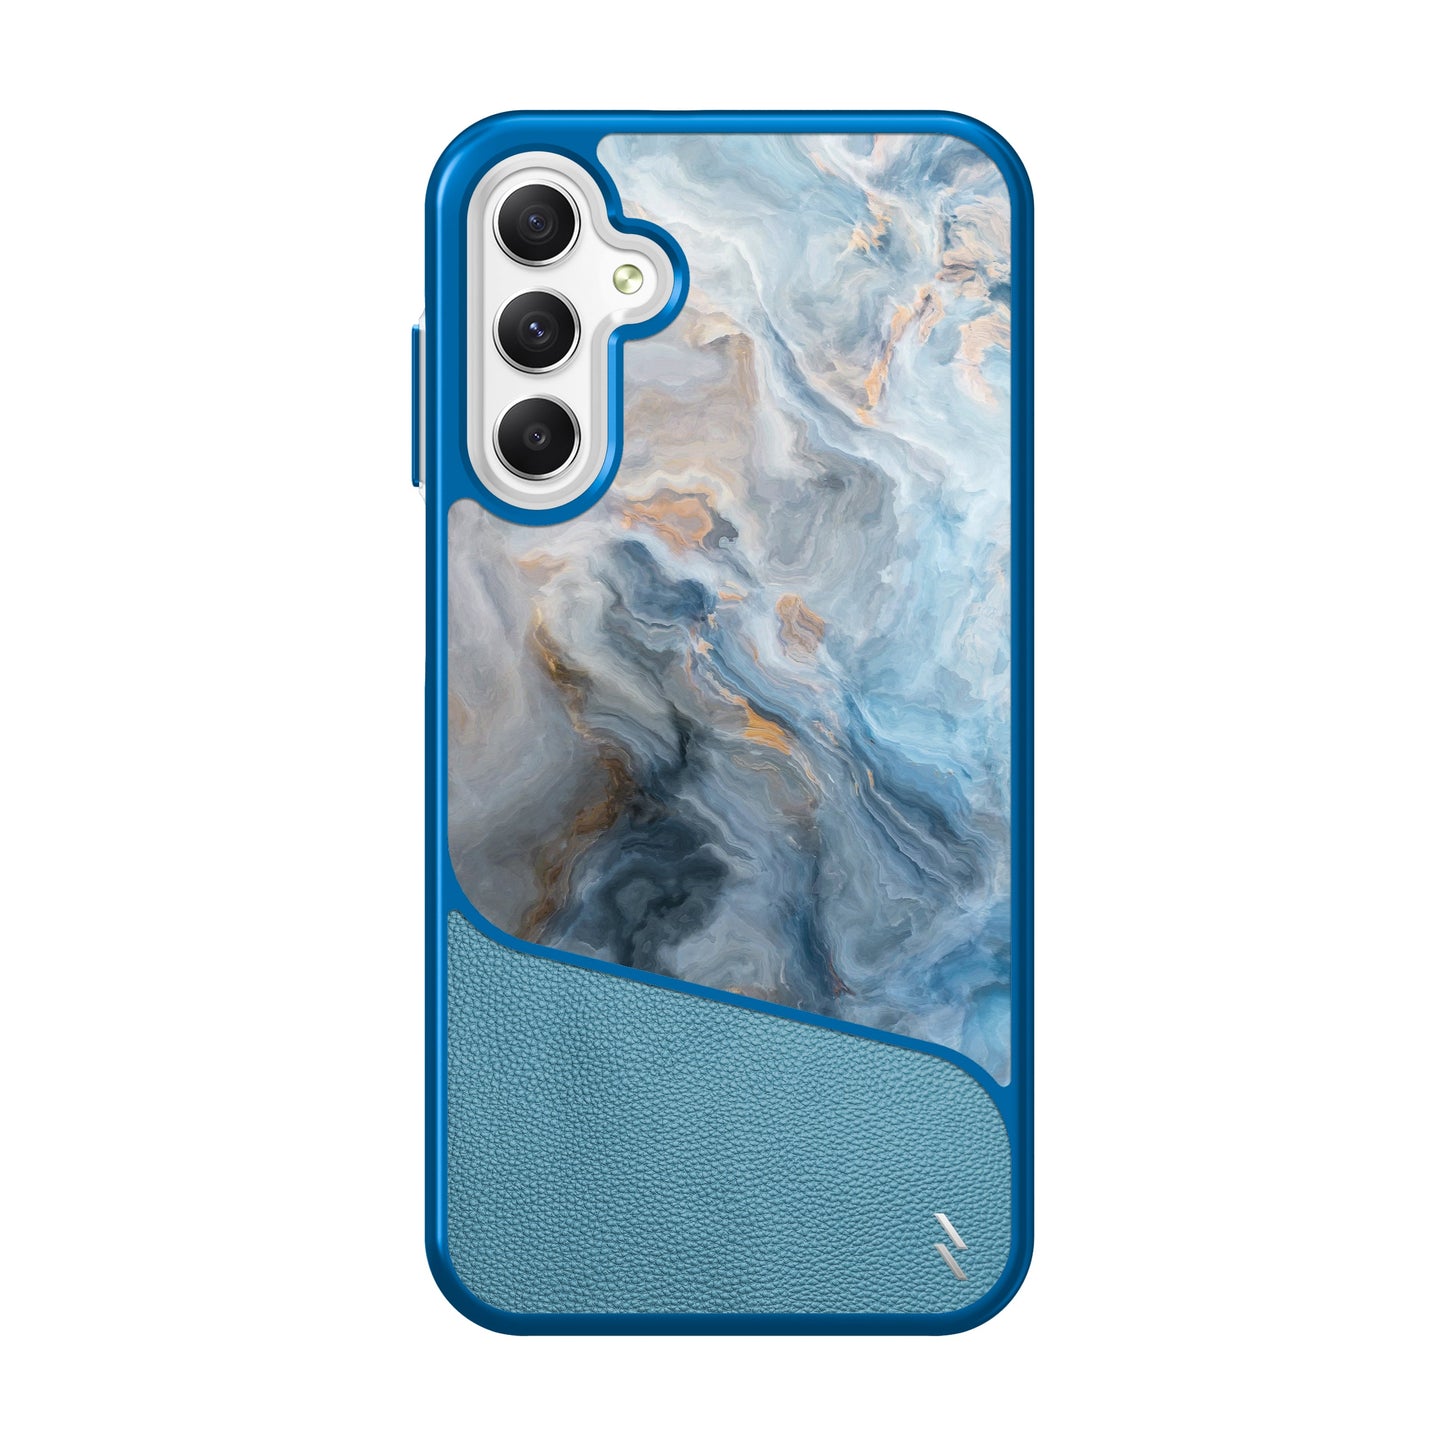 ZIZO DIVISION Series Galaxy A15 5G Case - Marble